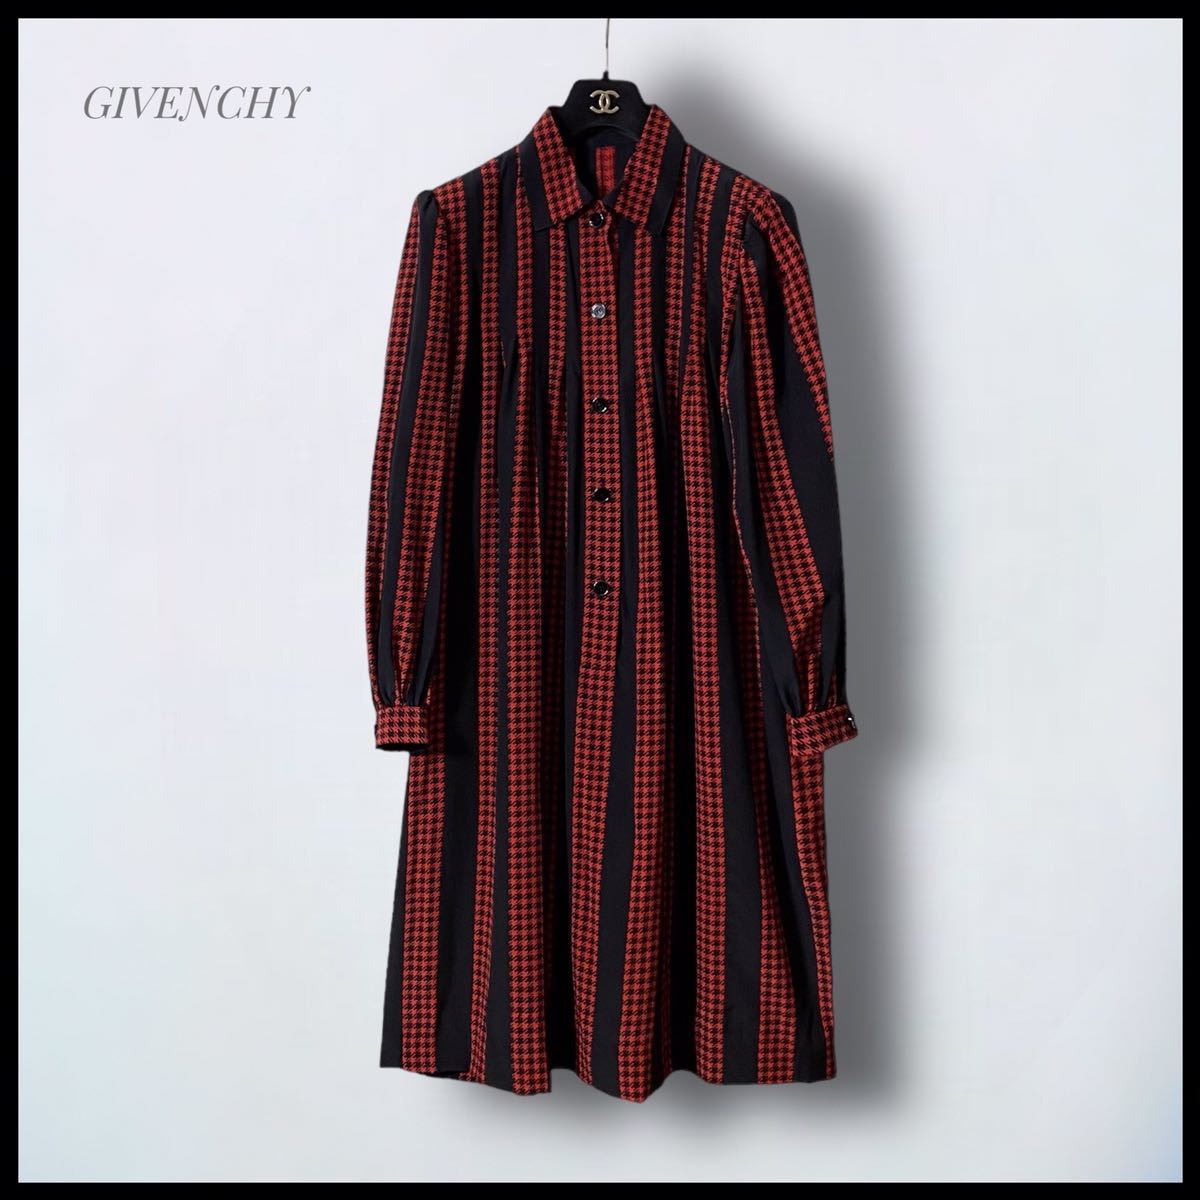 GIVENCHY】シルク100% 総柄 ワンピース 膝丈 シャツワンピース 長袖